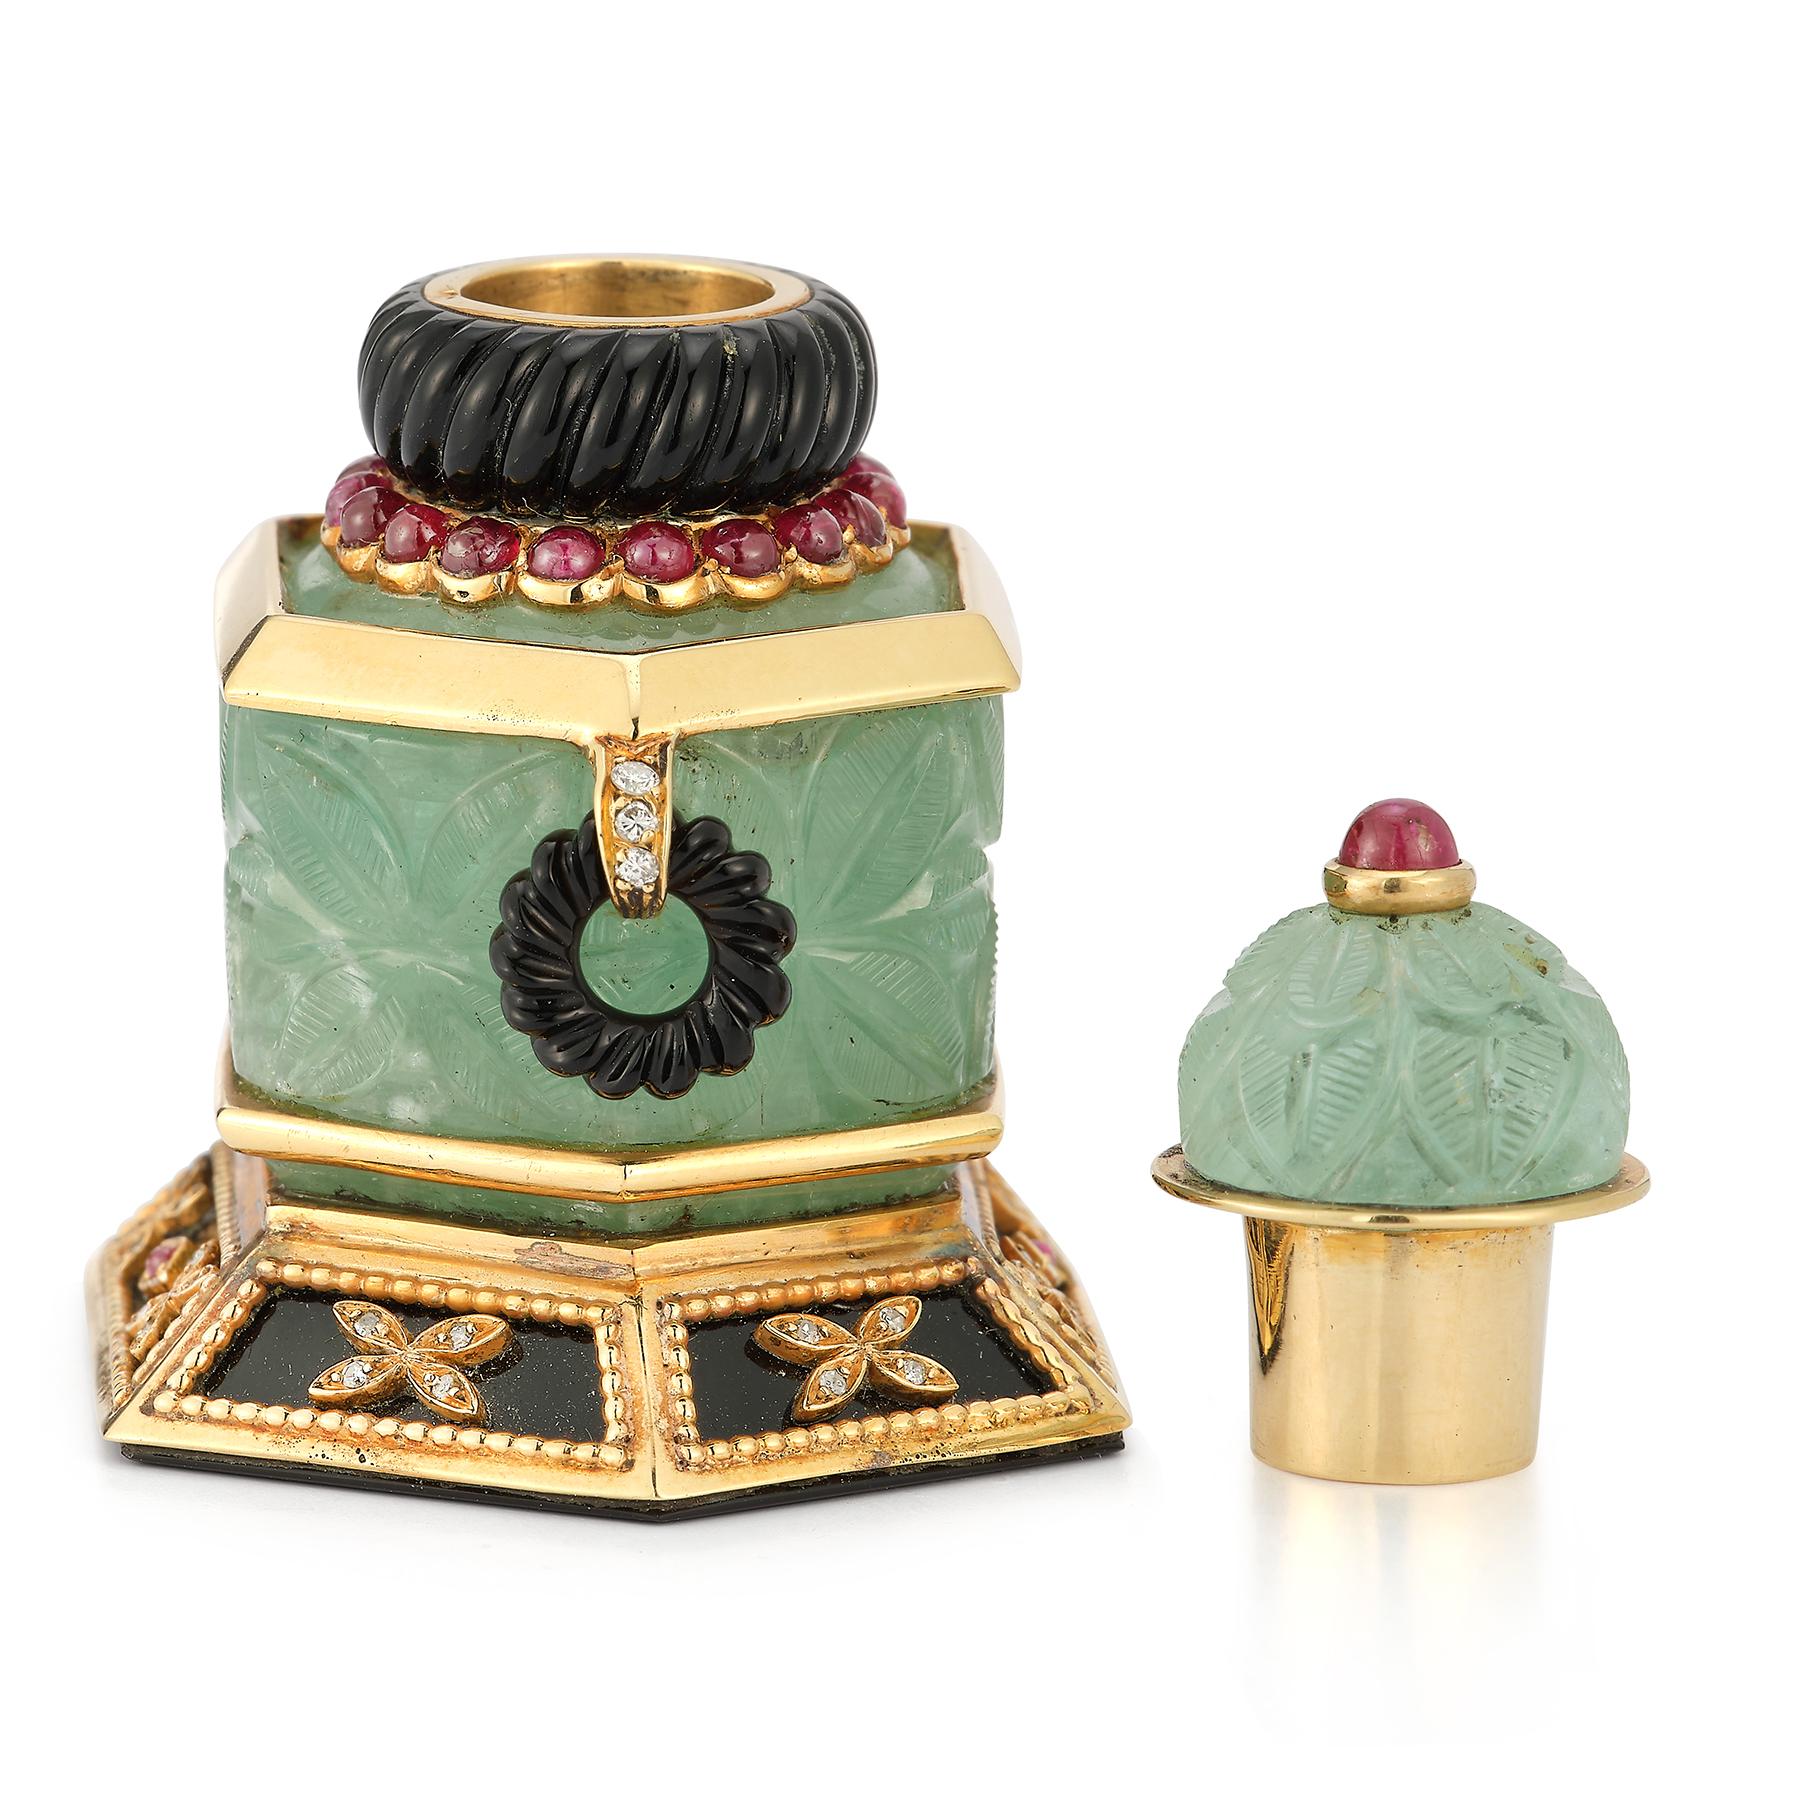 Cabochon Carved Emerald Perfume Bottle Flask by Mappin and Webb